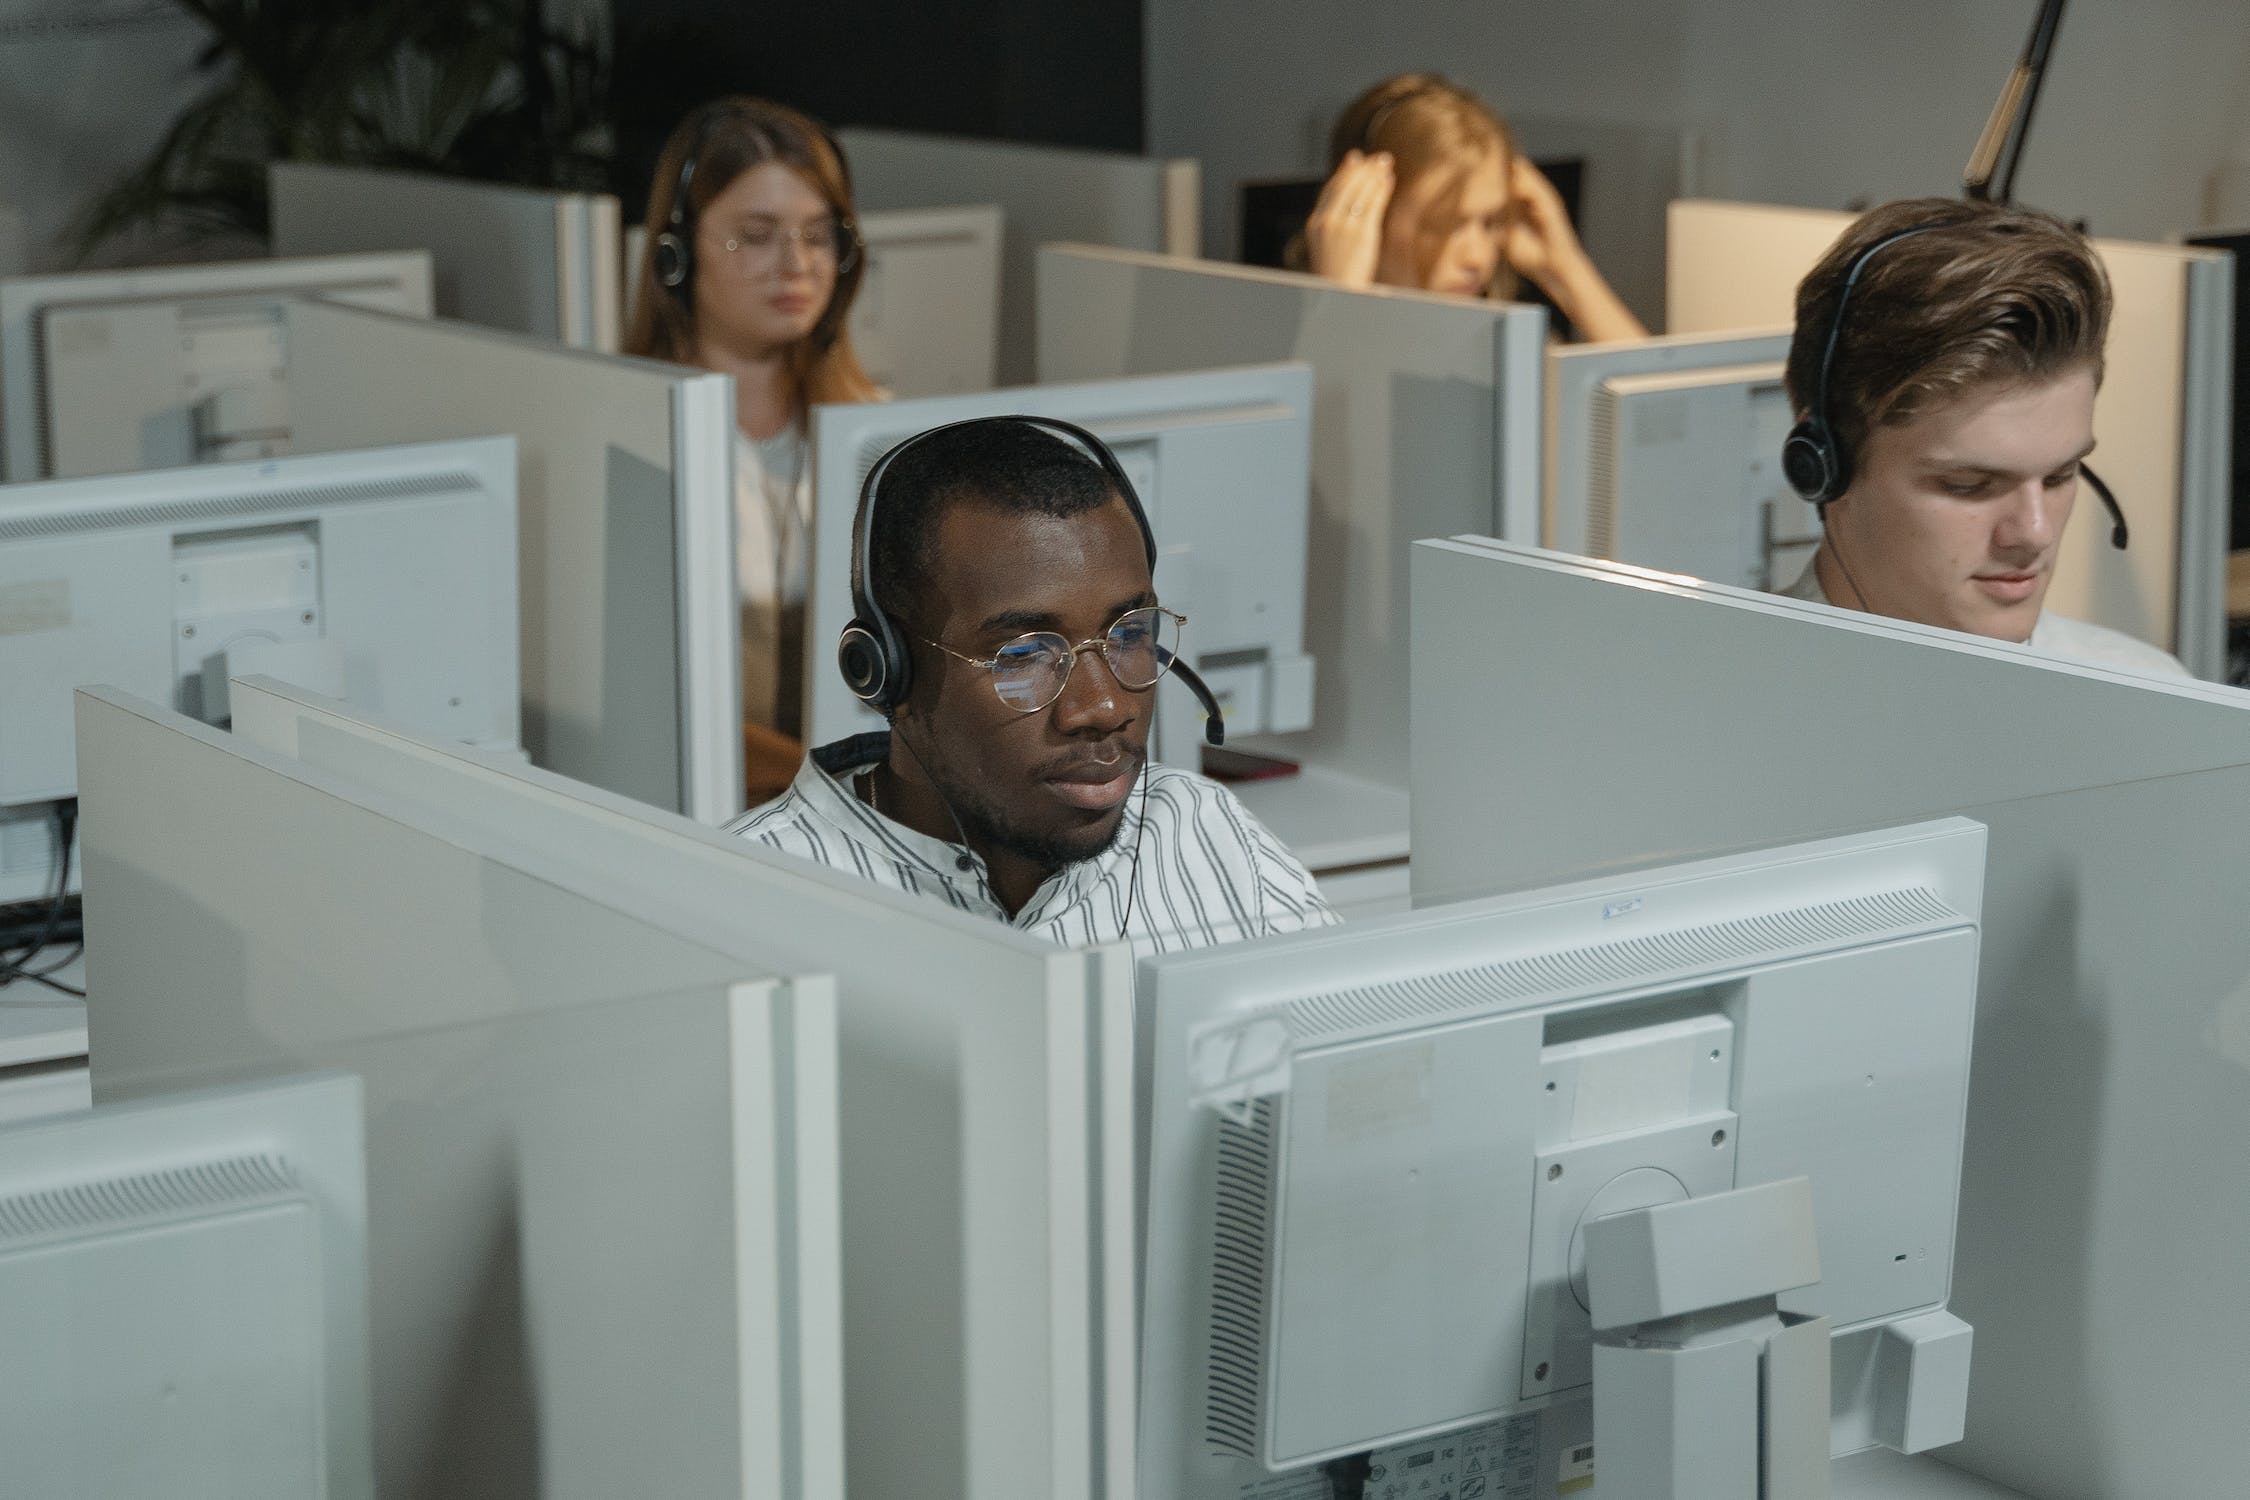 A man working in a call center